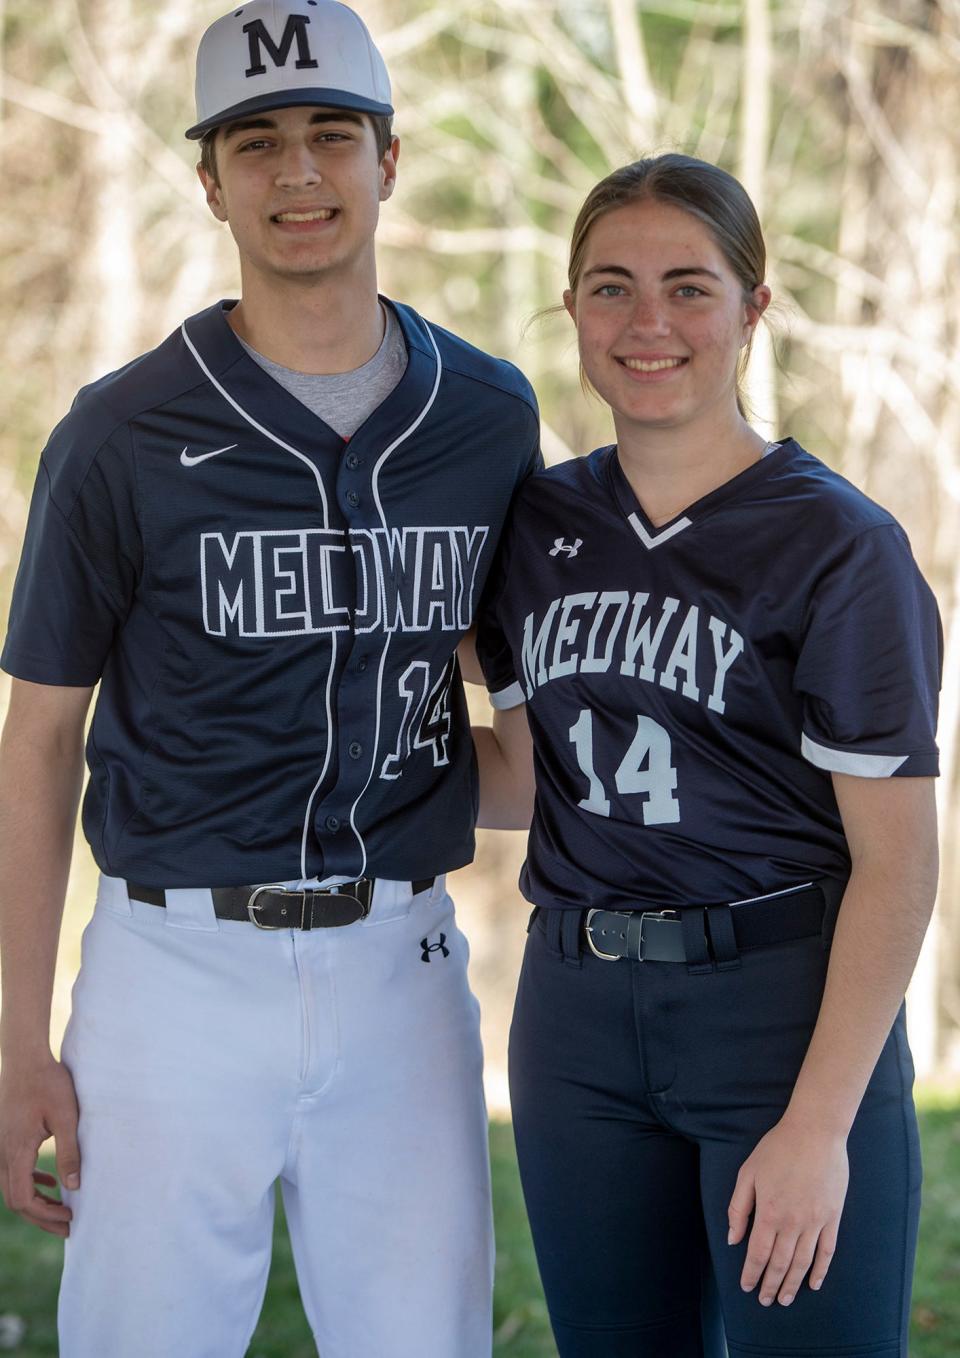 Medway High School juniors and twins Jason and Priya Bedard are each captains of their respective teams, softball and baseball, here before practice, April 9, 2024.